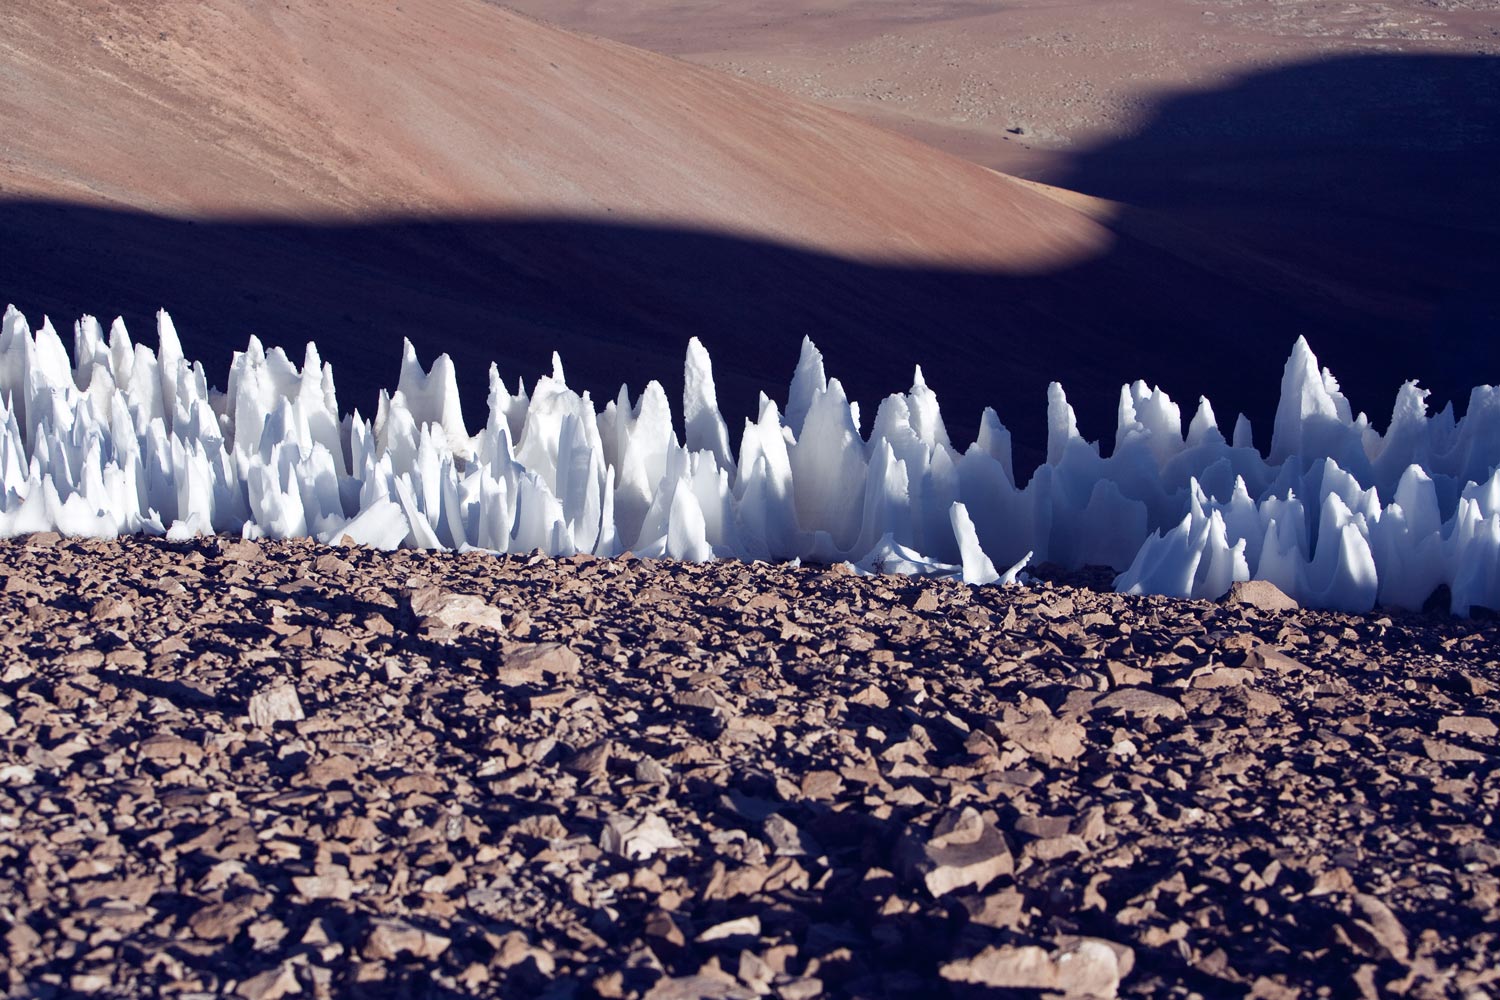 Natural ice spikes, called penitentes in Chile